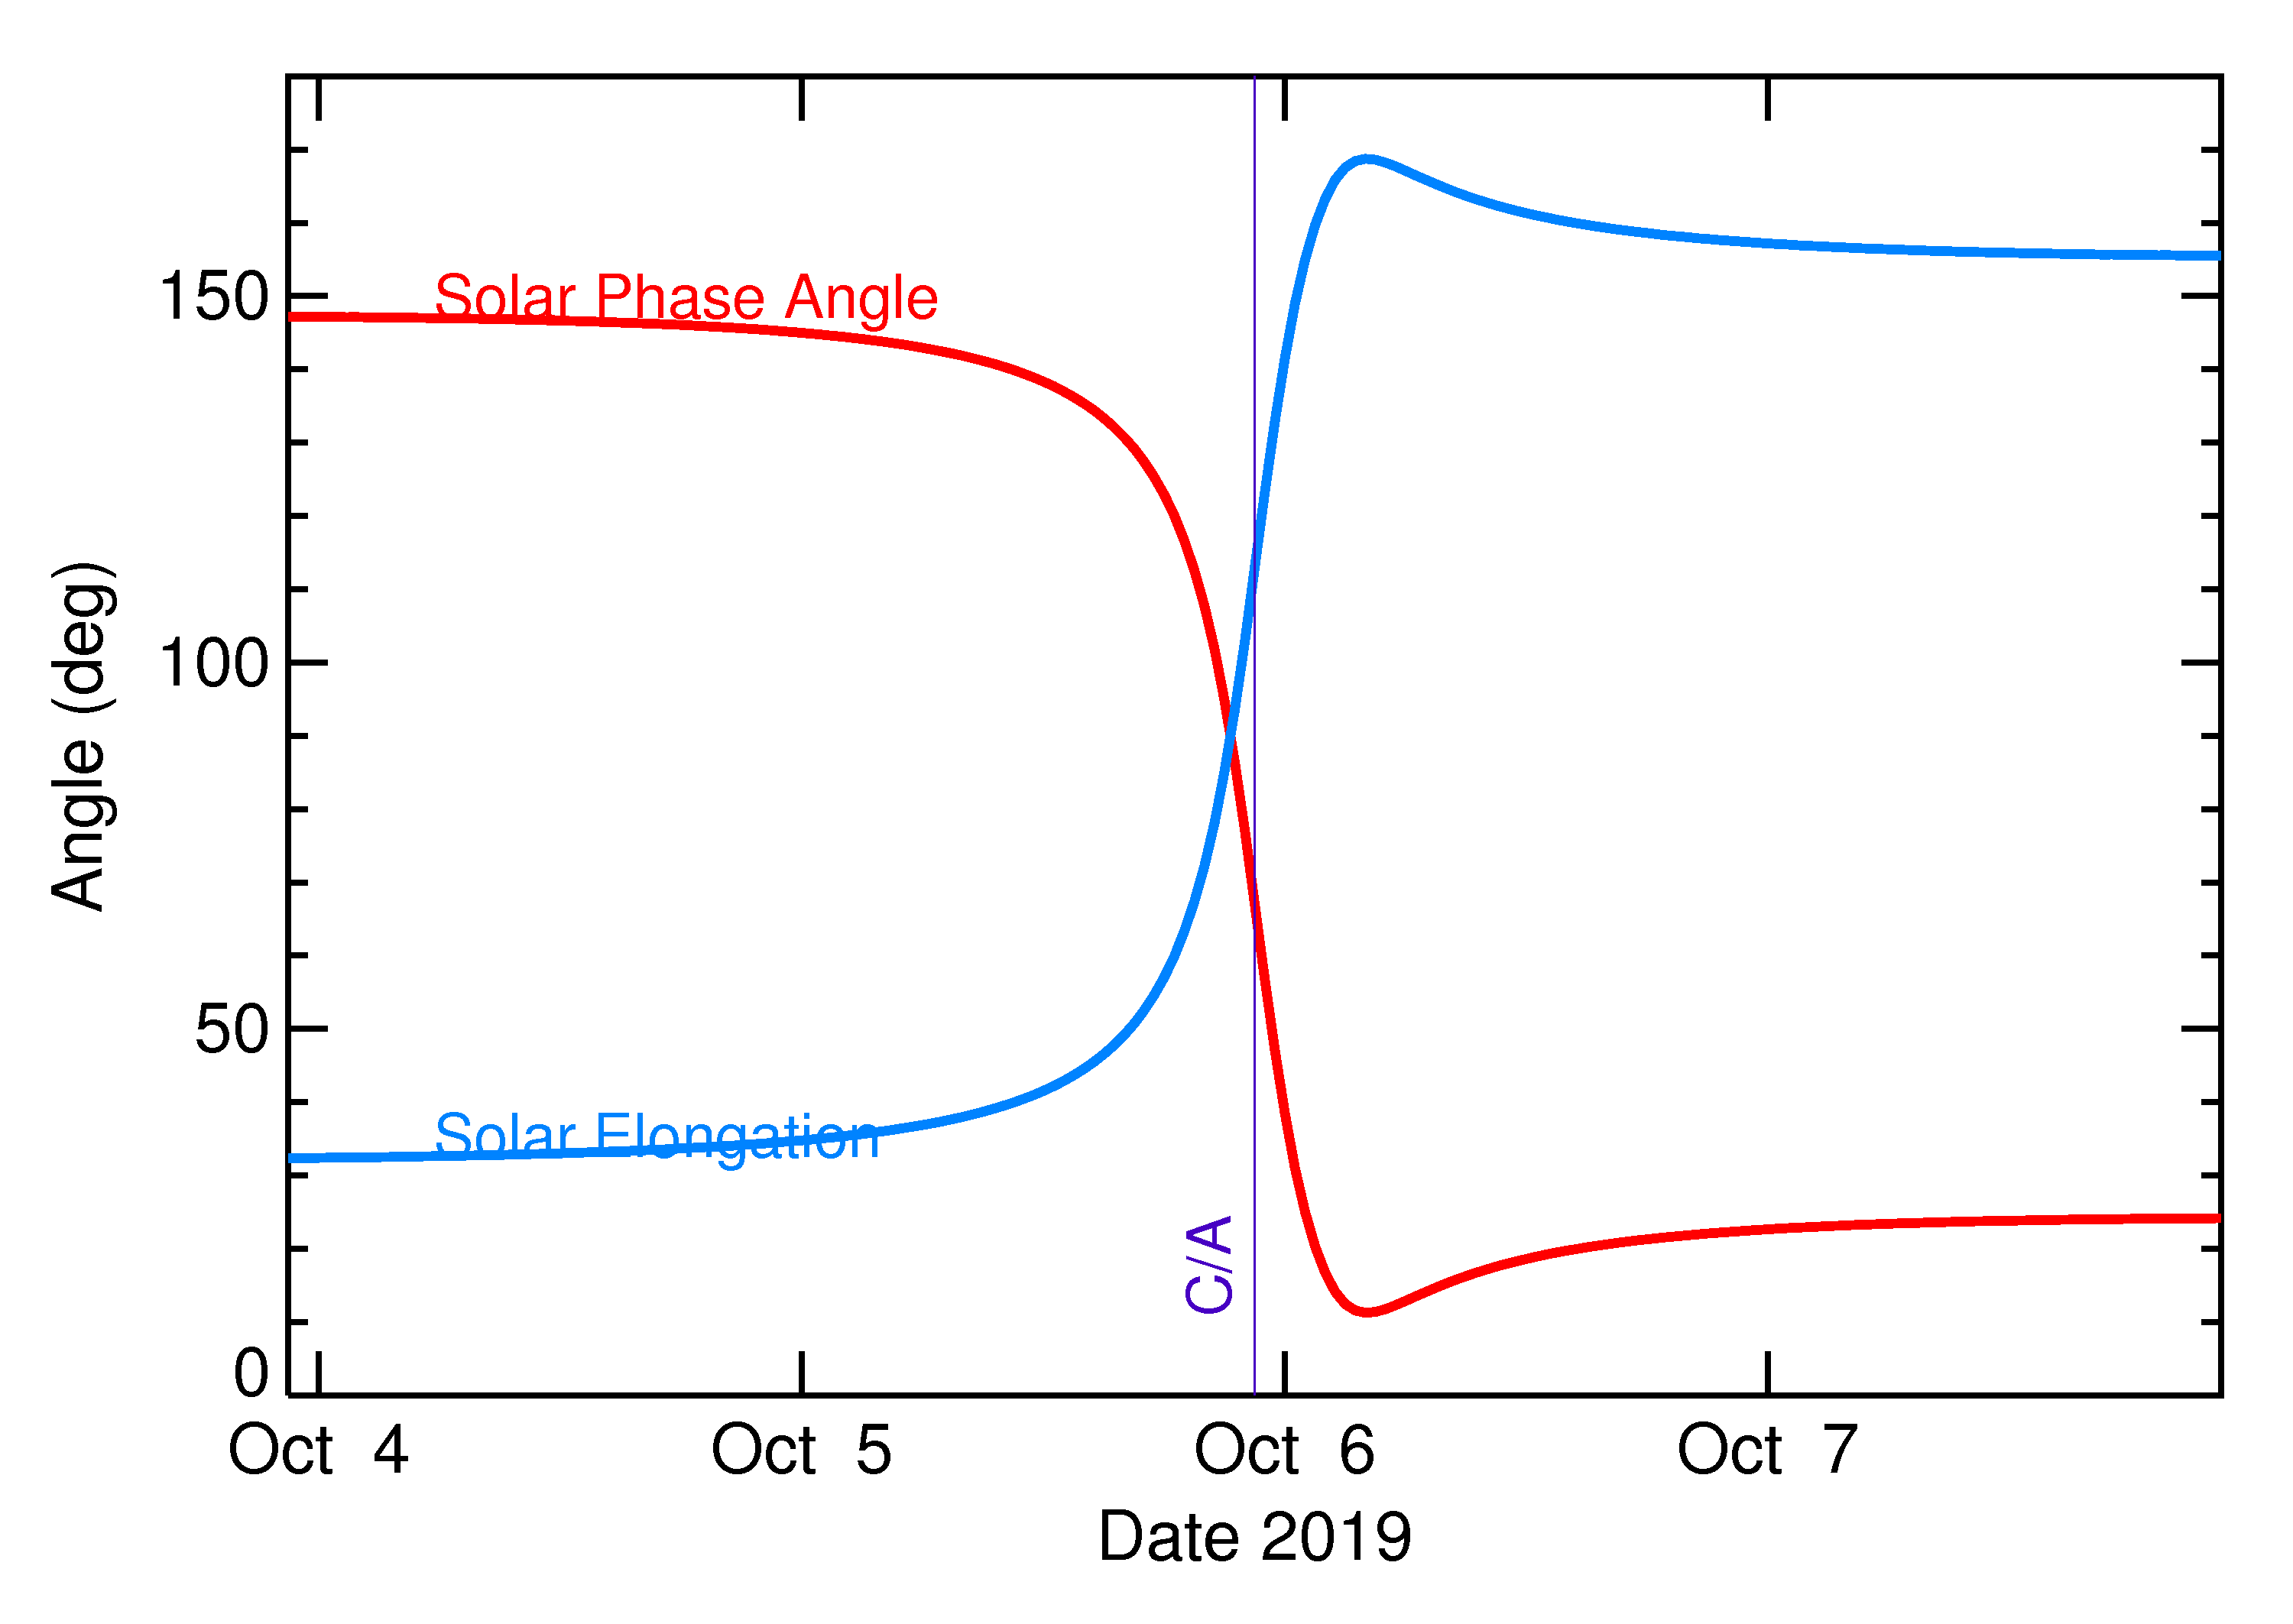 Solar Elongation and Solar Phase Angle of 2019 TN5 in the days around closest approach